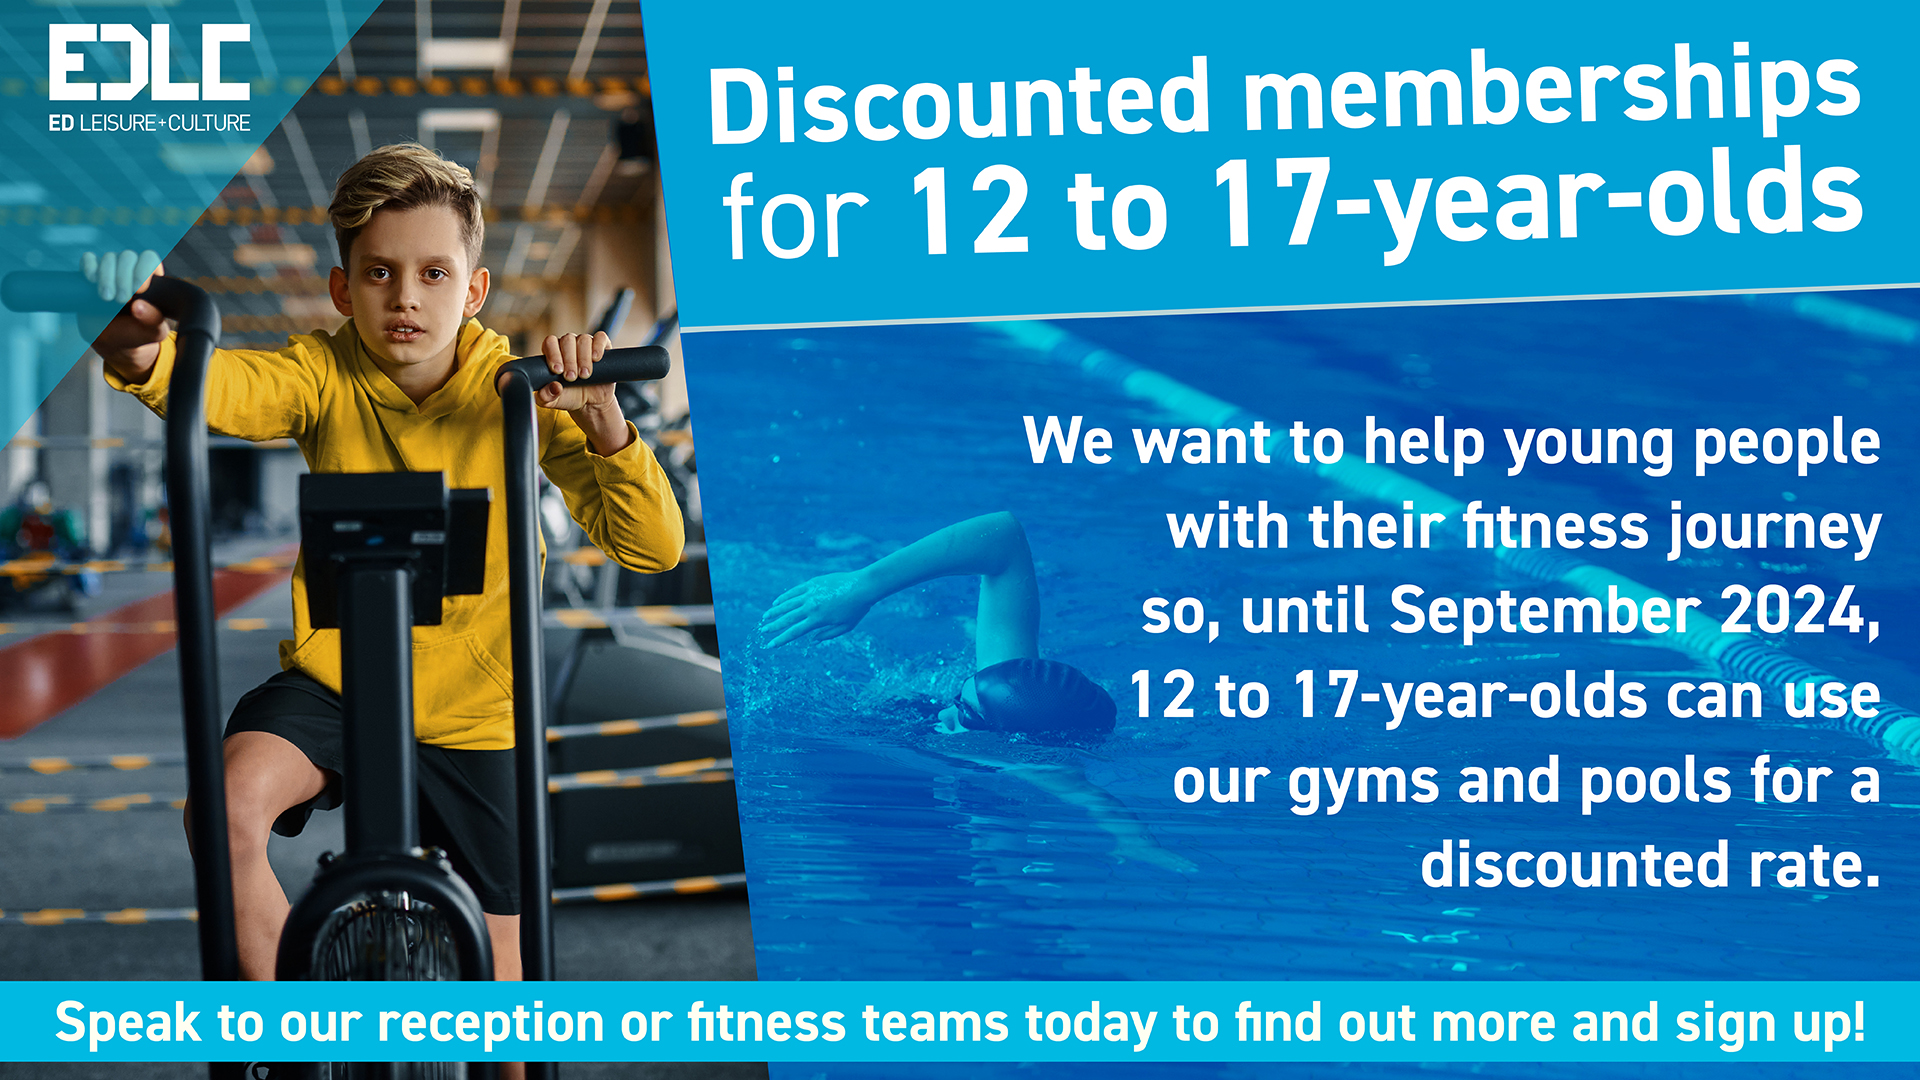 Poster of boy on exercise bike with wording: Discounted membership for 12 to 17-year-olds